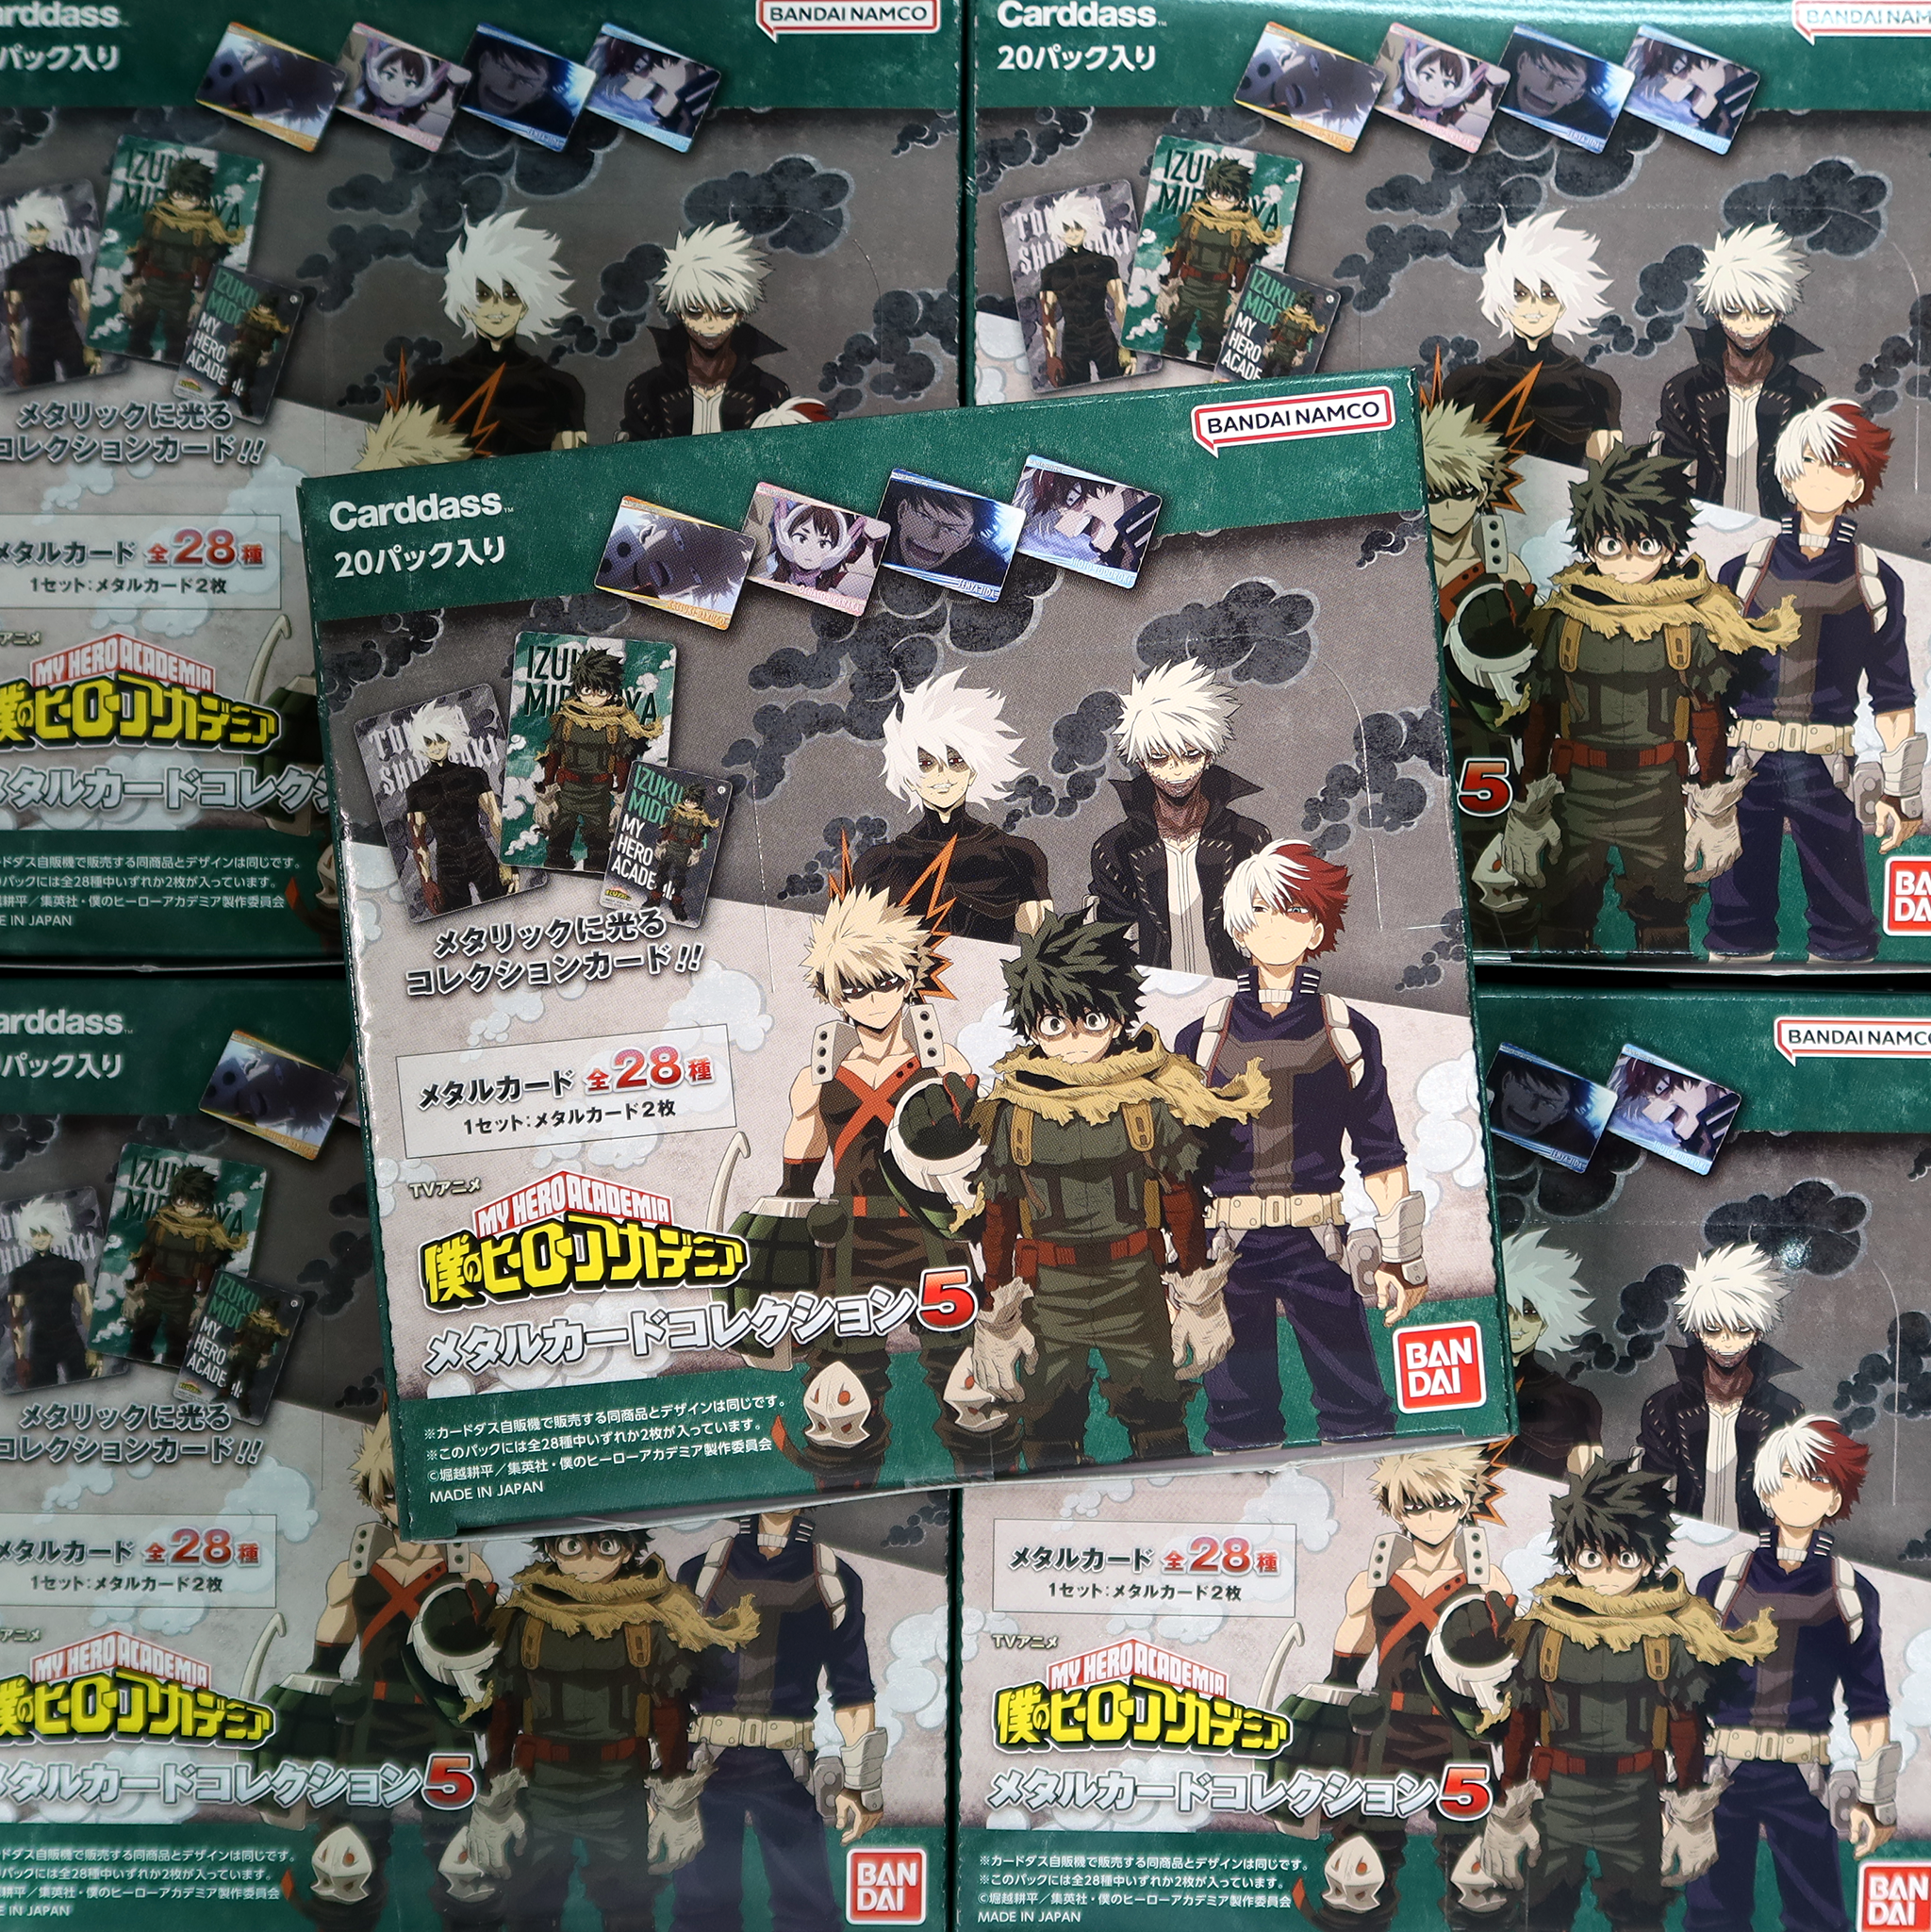 MY HERO ACADEMIA Metal Card Collection 5 pack Ver. Box